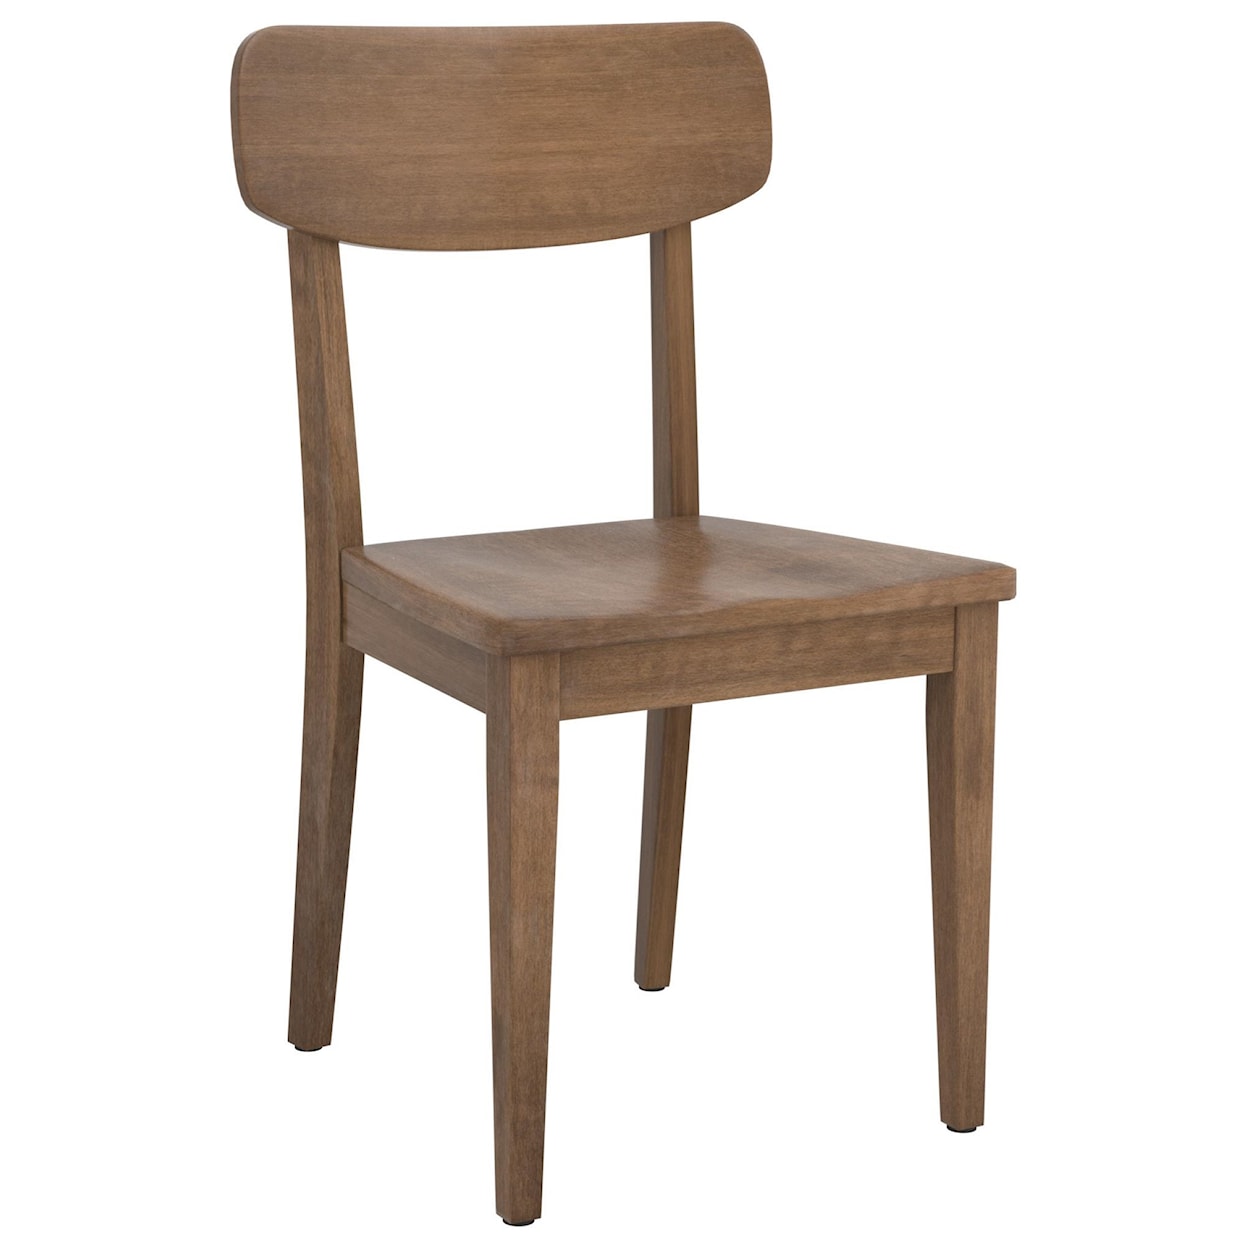 Wengerd Wood Products Shelby Side Chair